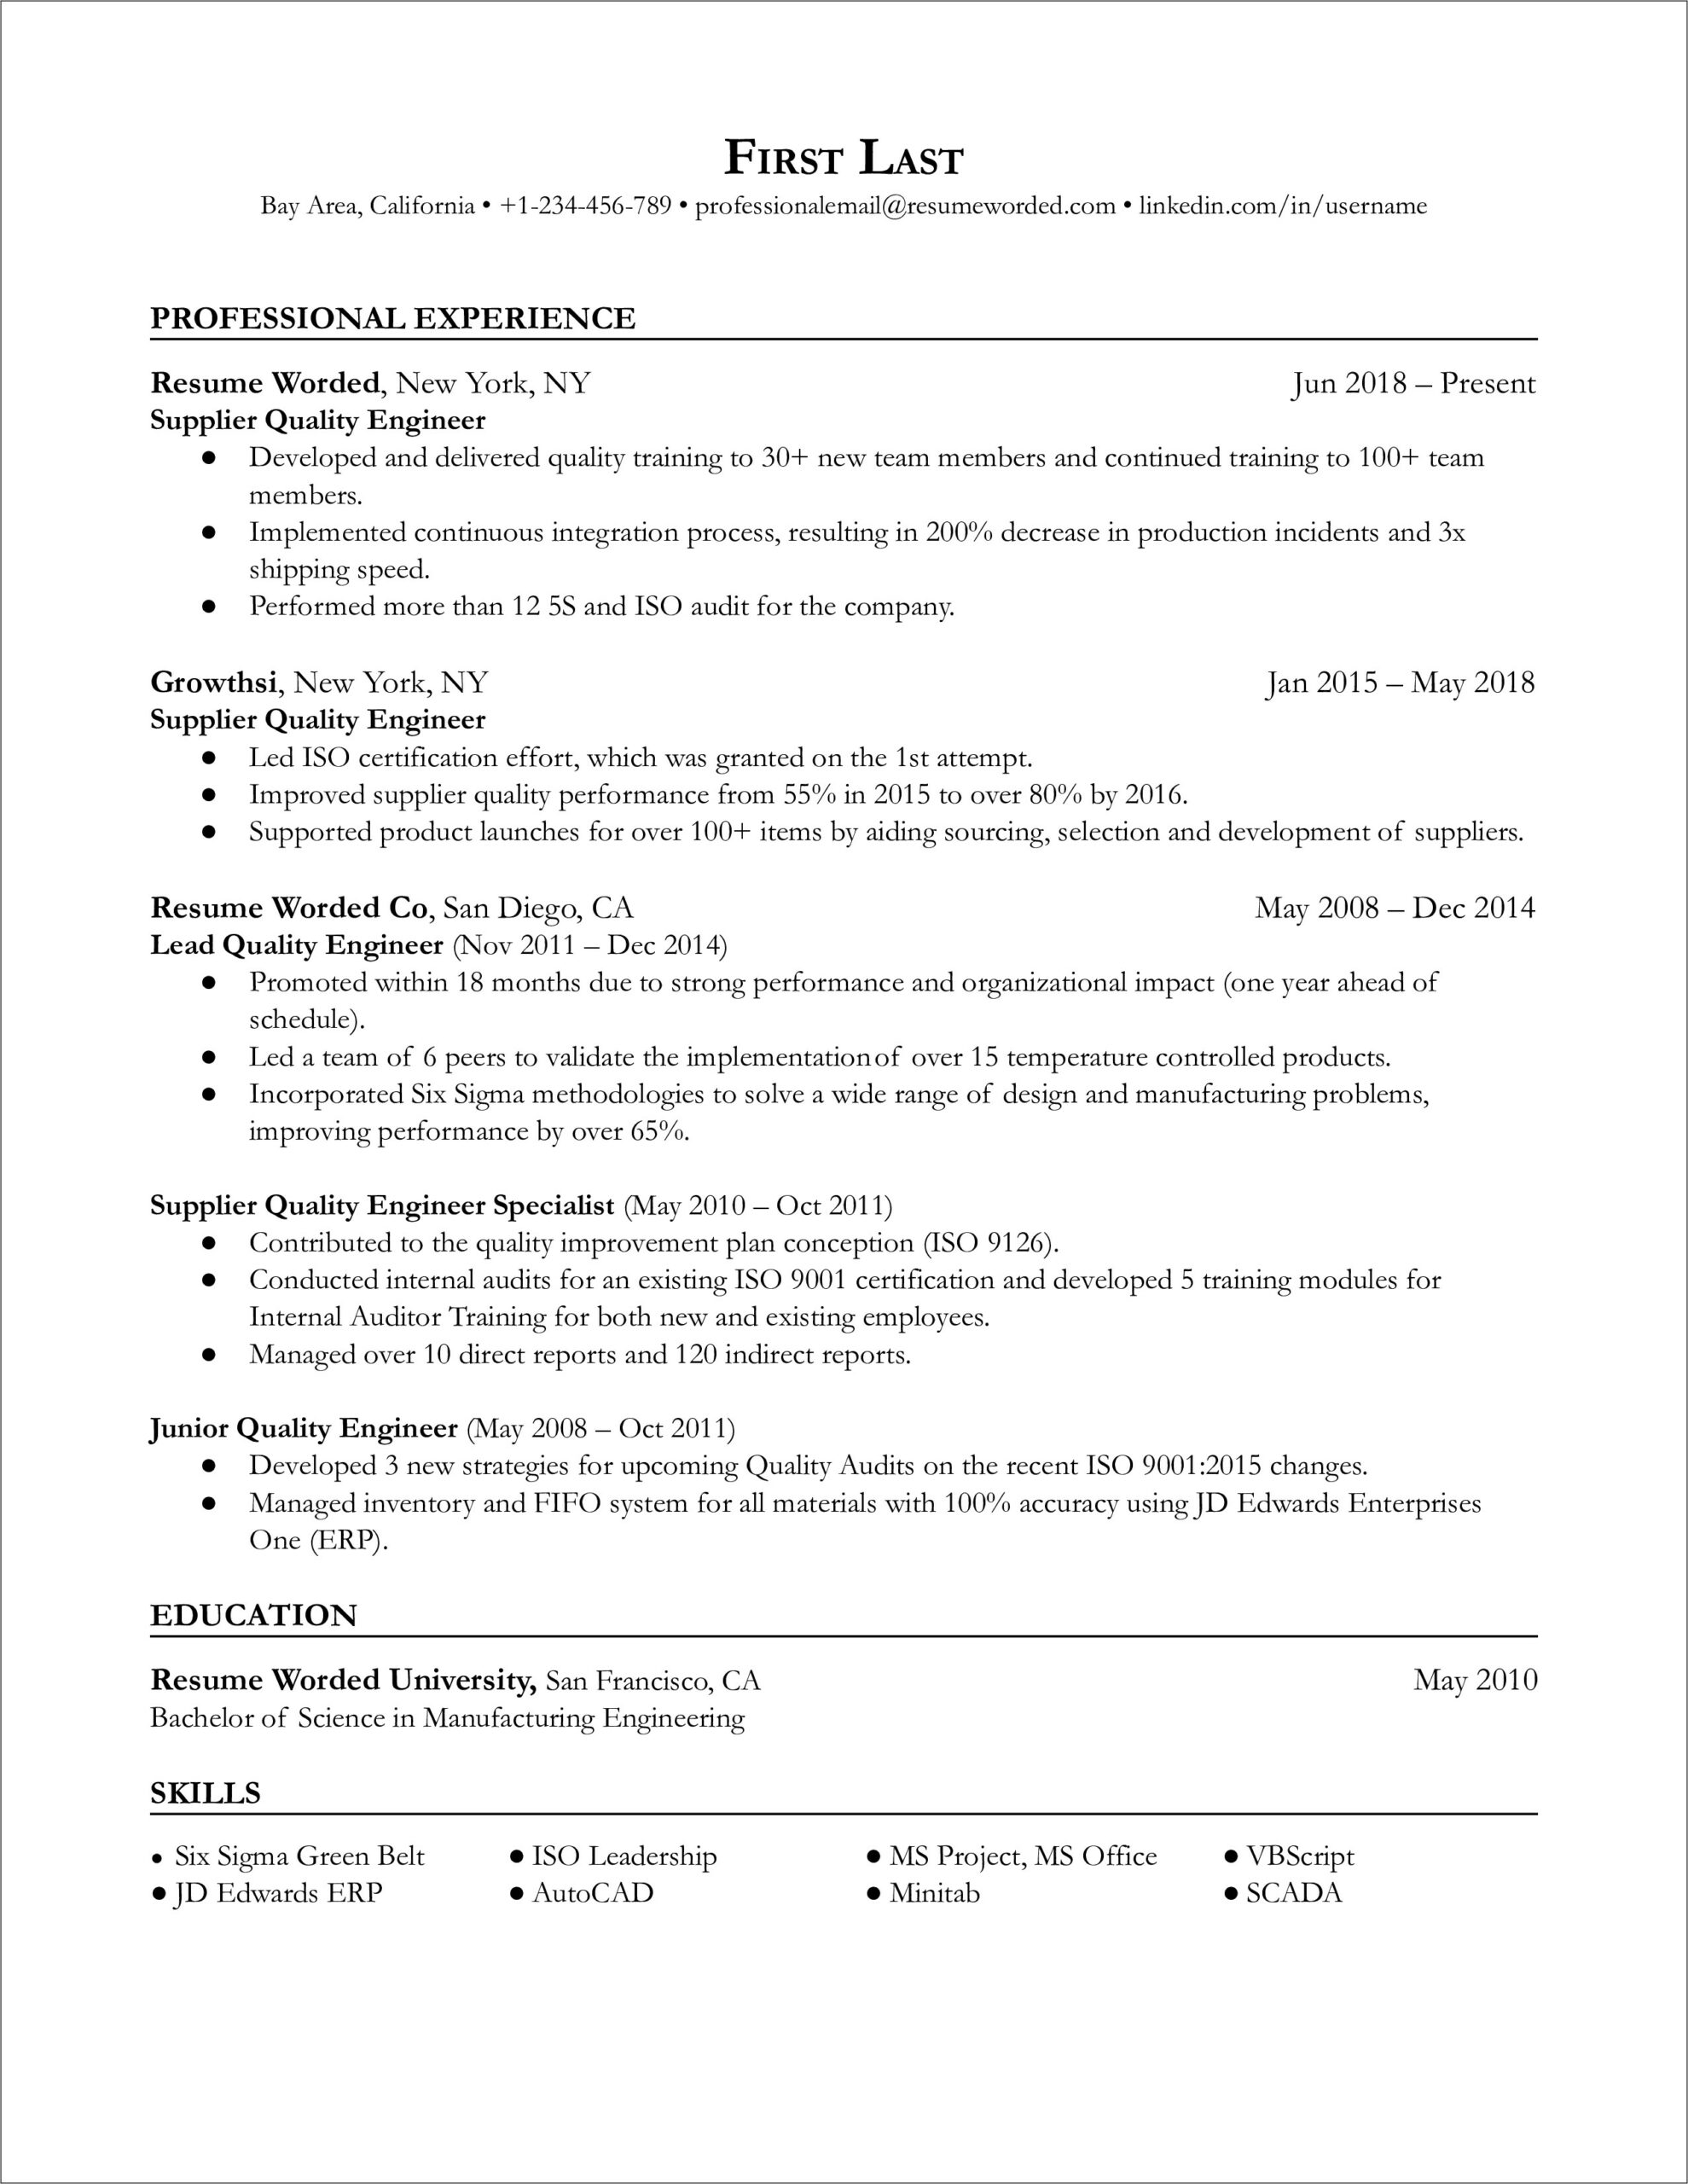 Resume Samples For Six Sigma